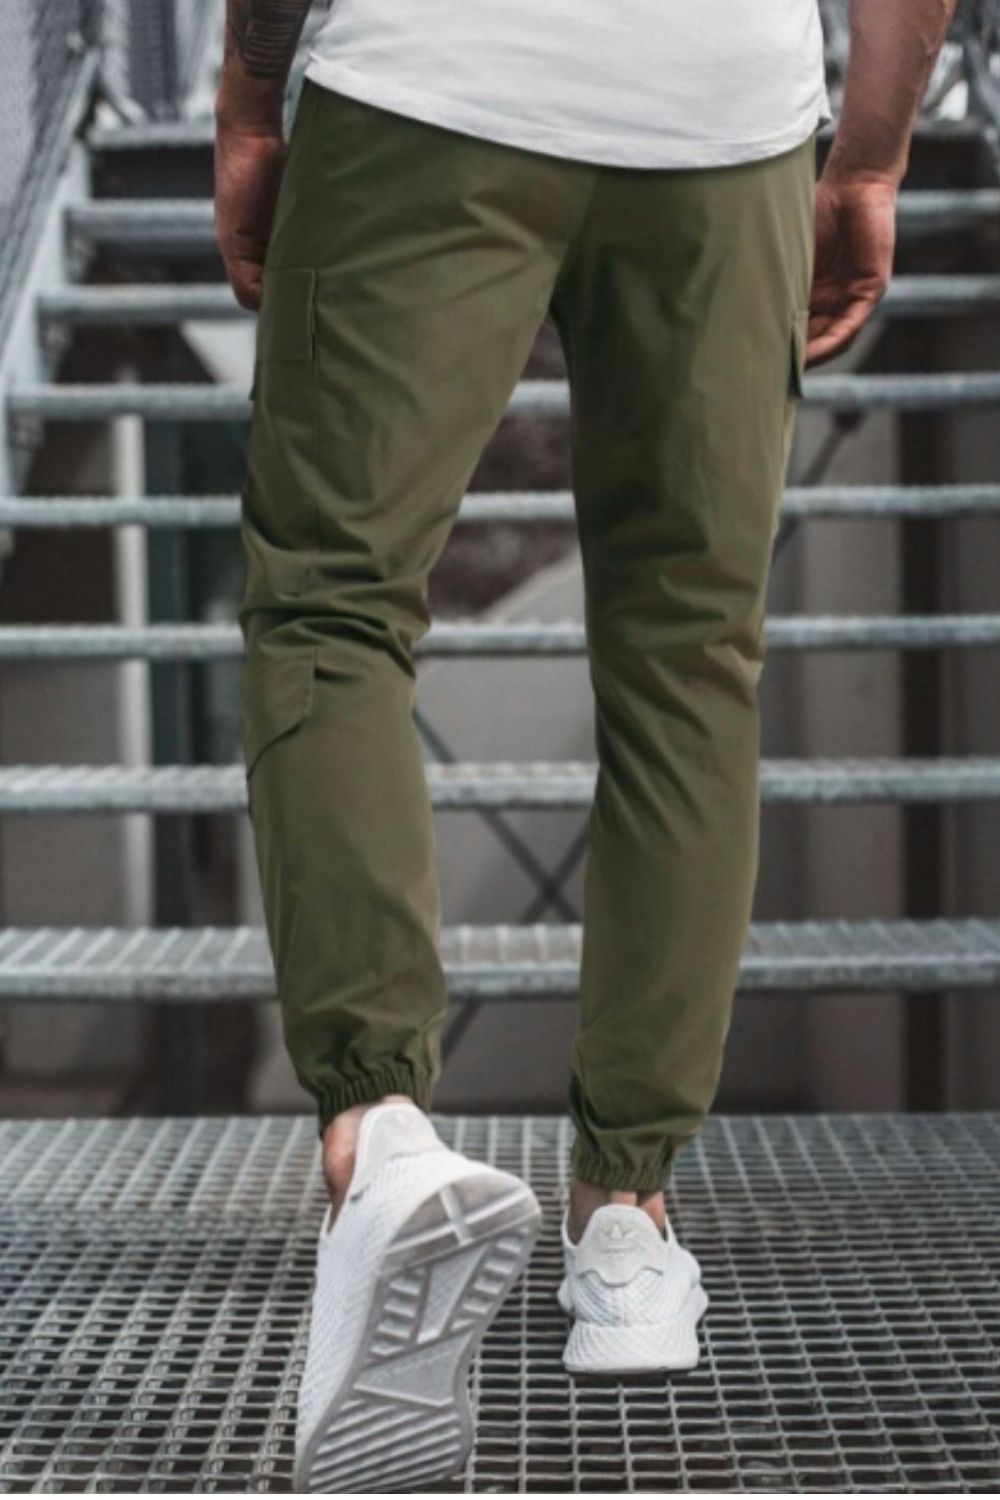 Ayolanni Army Green Cargo Pants Men's Cargo Trousers Work Wear Combat  Safety Cargo 6 Pocket Full Pants Large - Walmart.com